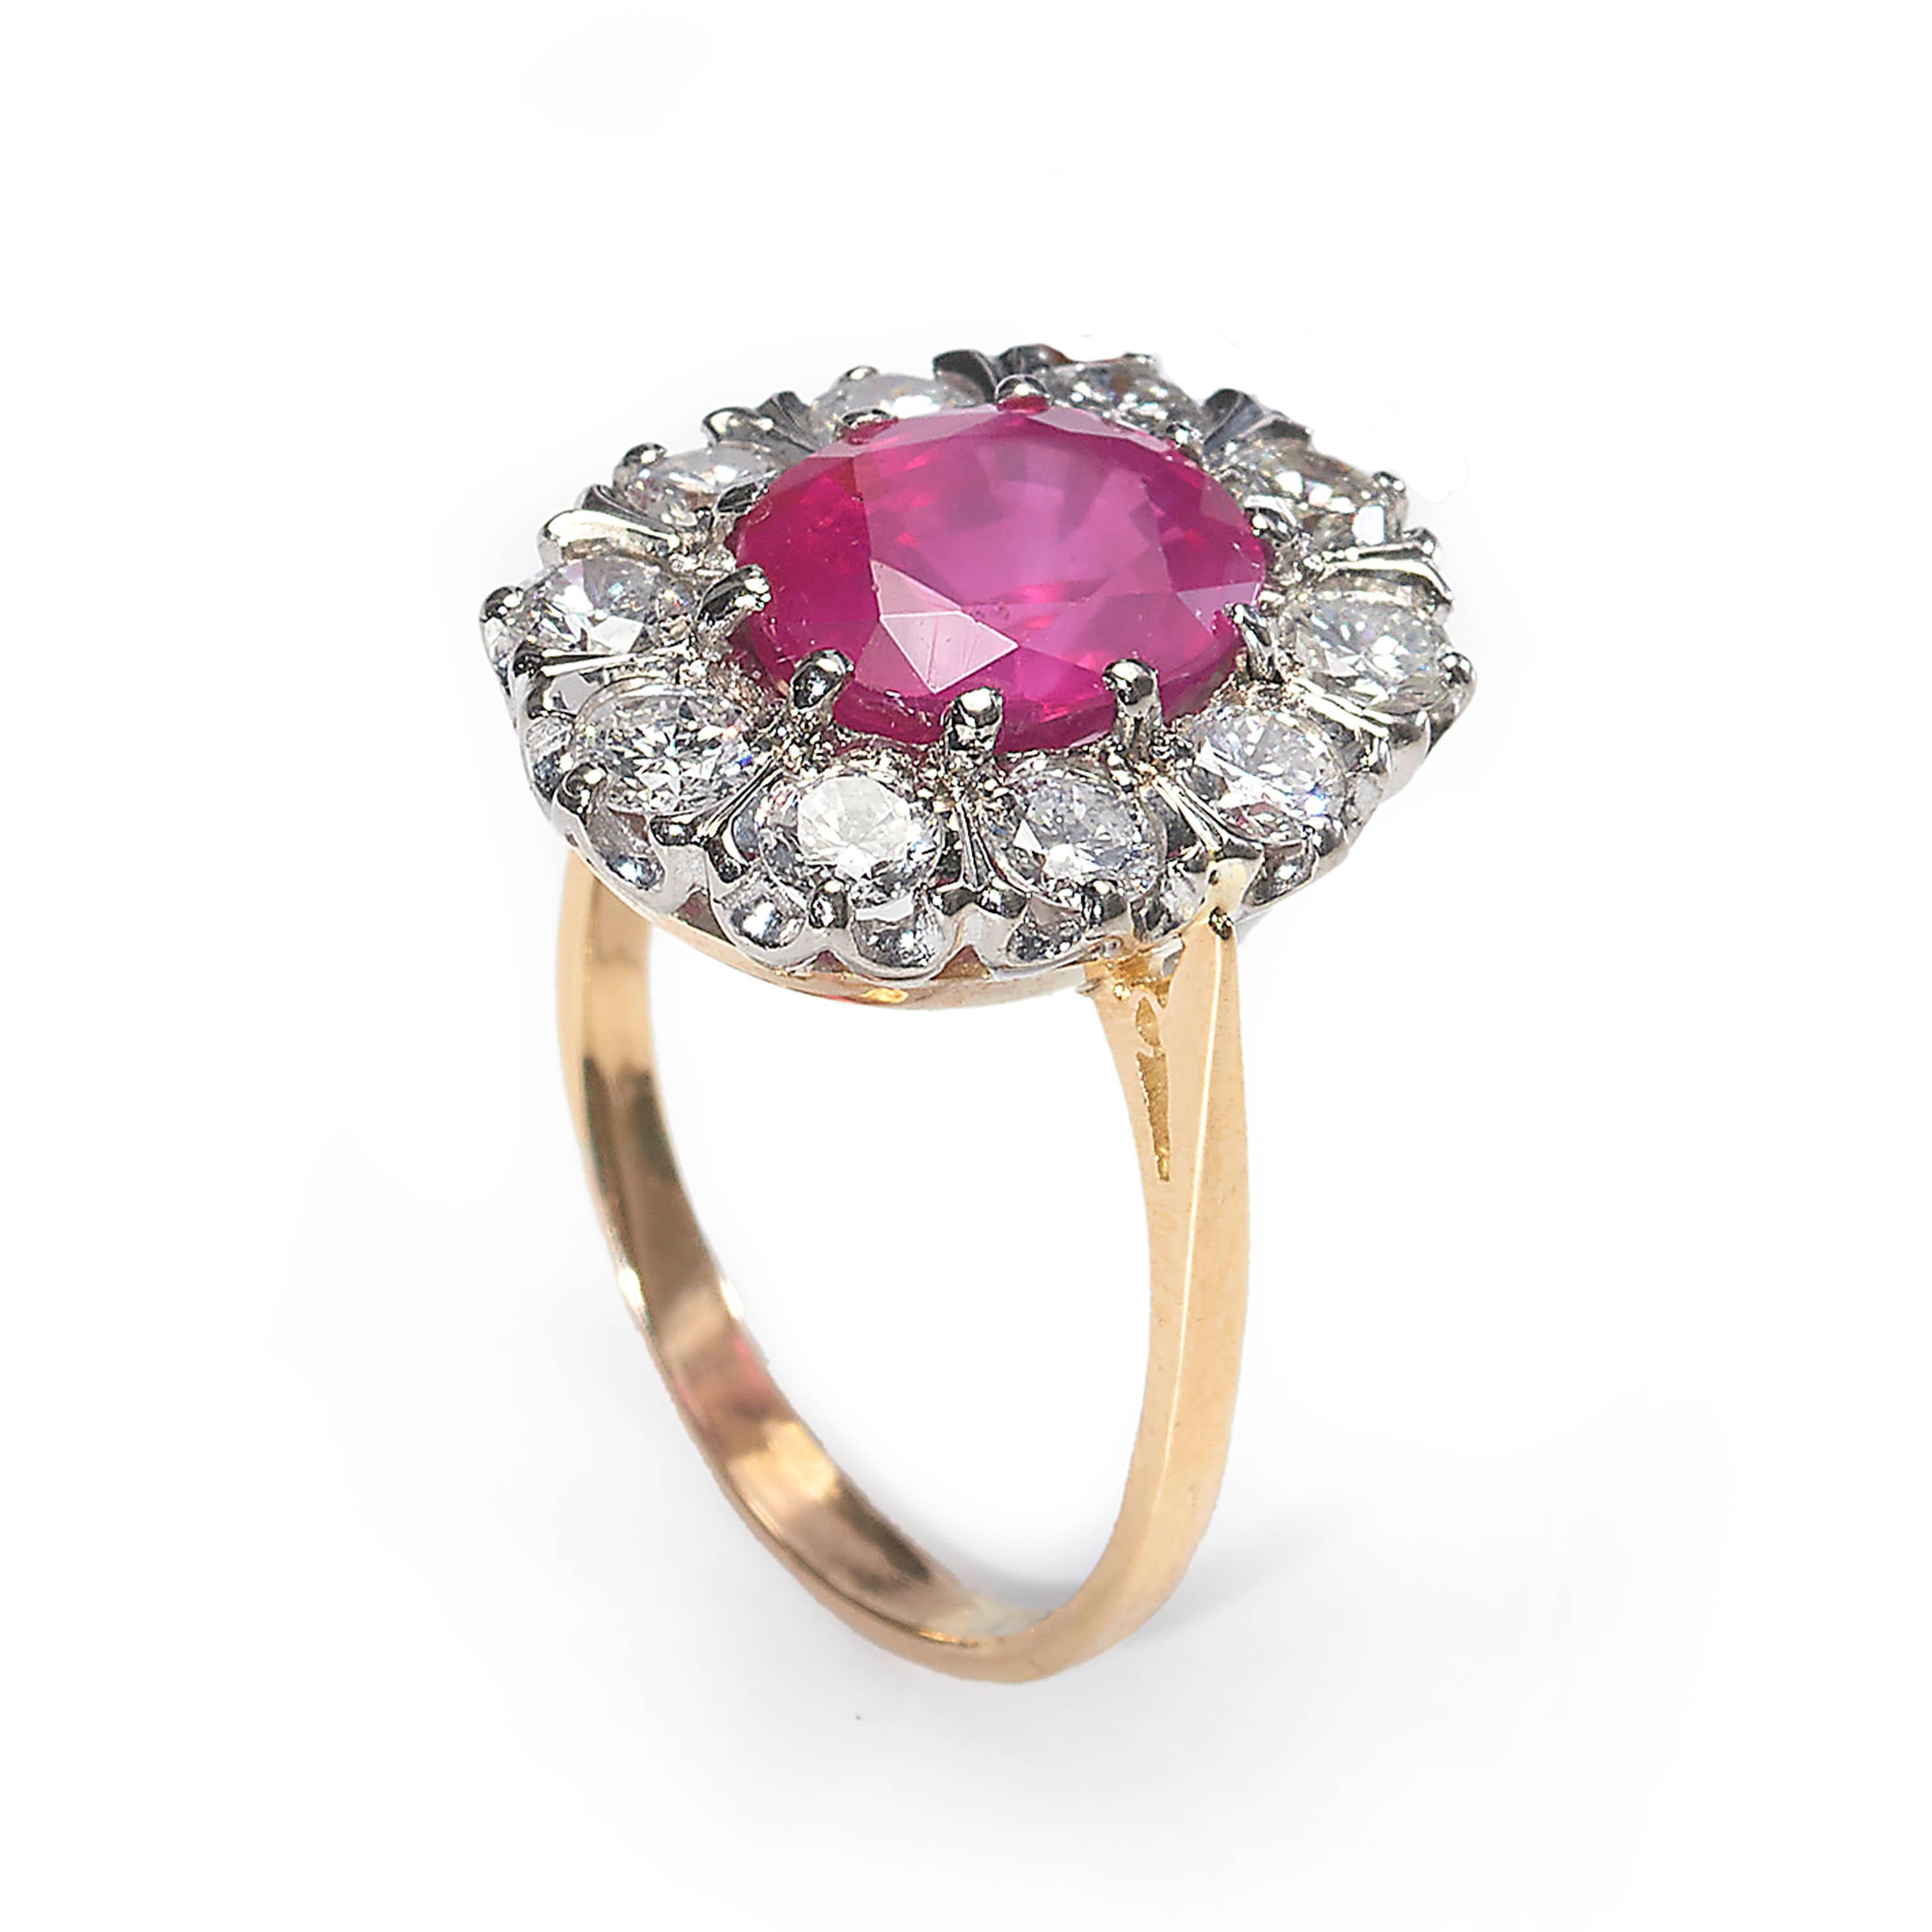 A vintage cluster ring, set with an oval-cut Burmese ruby to the centre, weighing 4.33 carats, surrounded by ten round brilliant-cut diamonds, mounted in 18ct yellow and white gold. Hallmarked London 1979.

With a ruby report from The Gem & Pearl